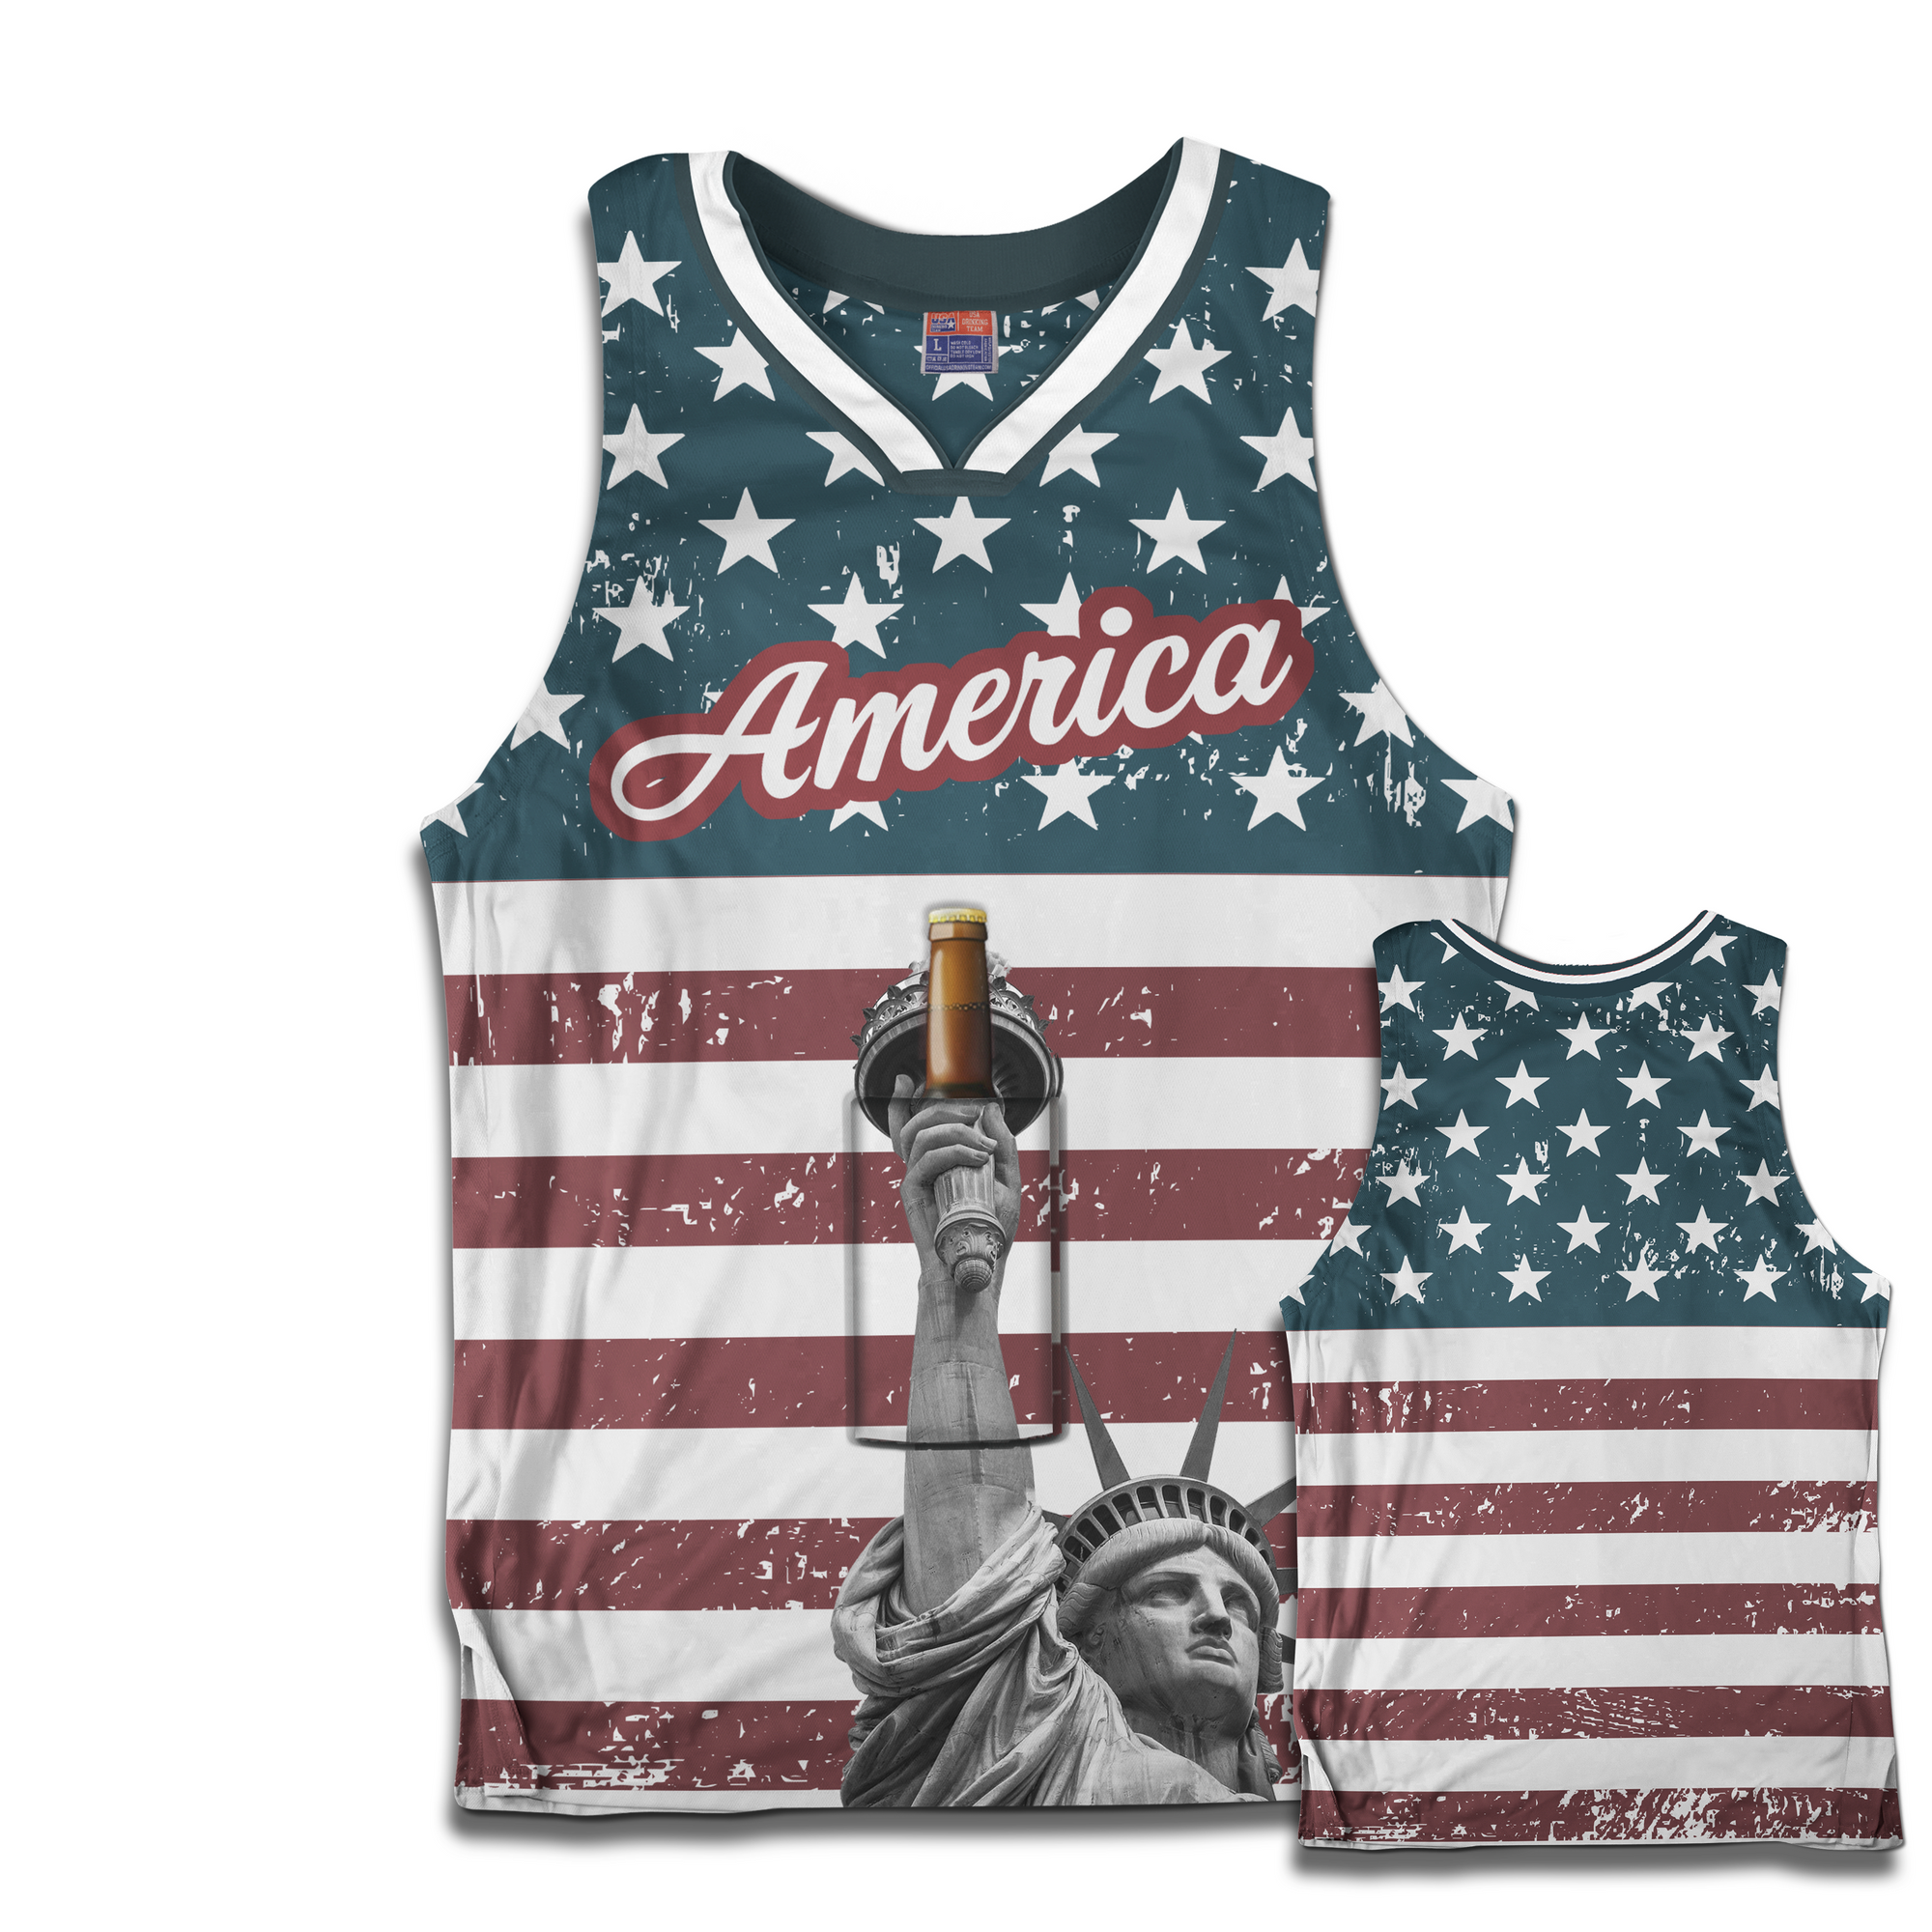 Statue of Liberty Basketball Jersey w/ Beer Holder - USA Drinking Team